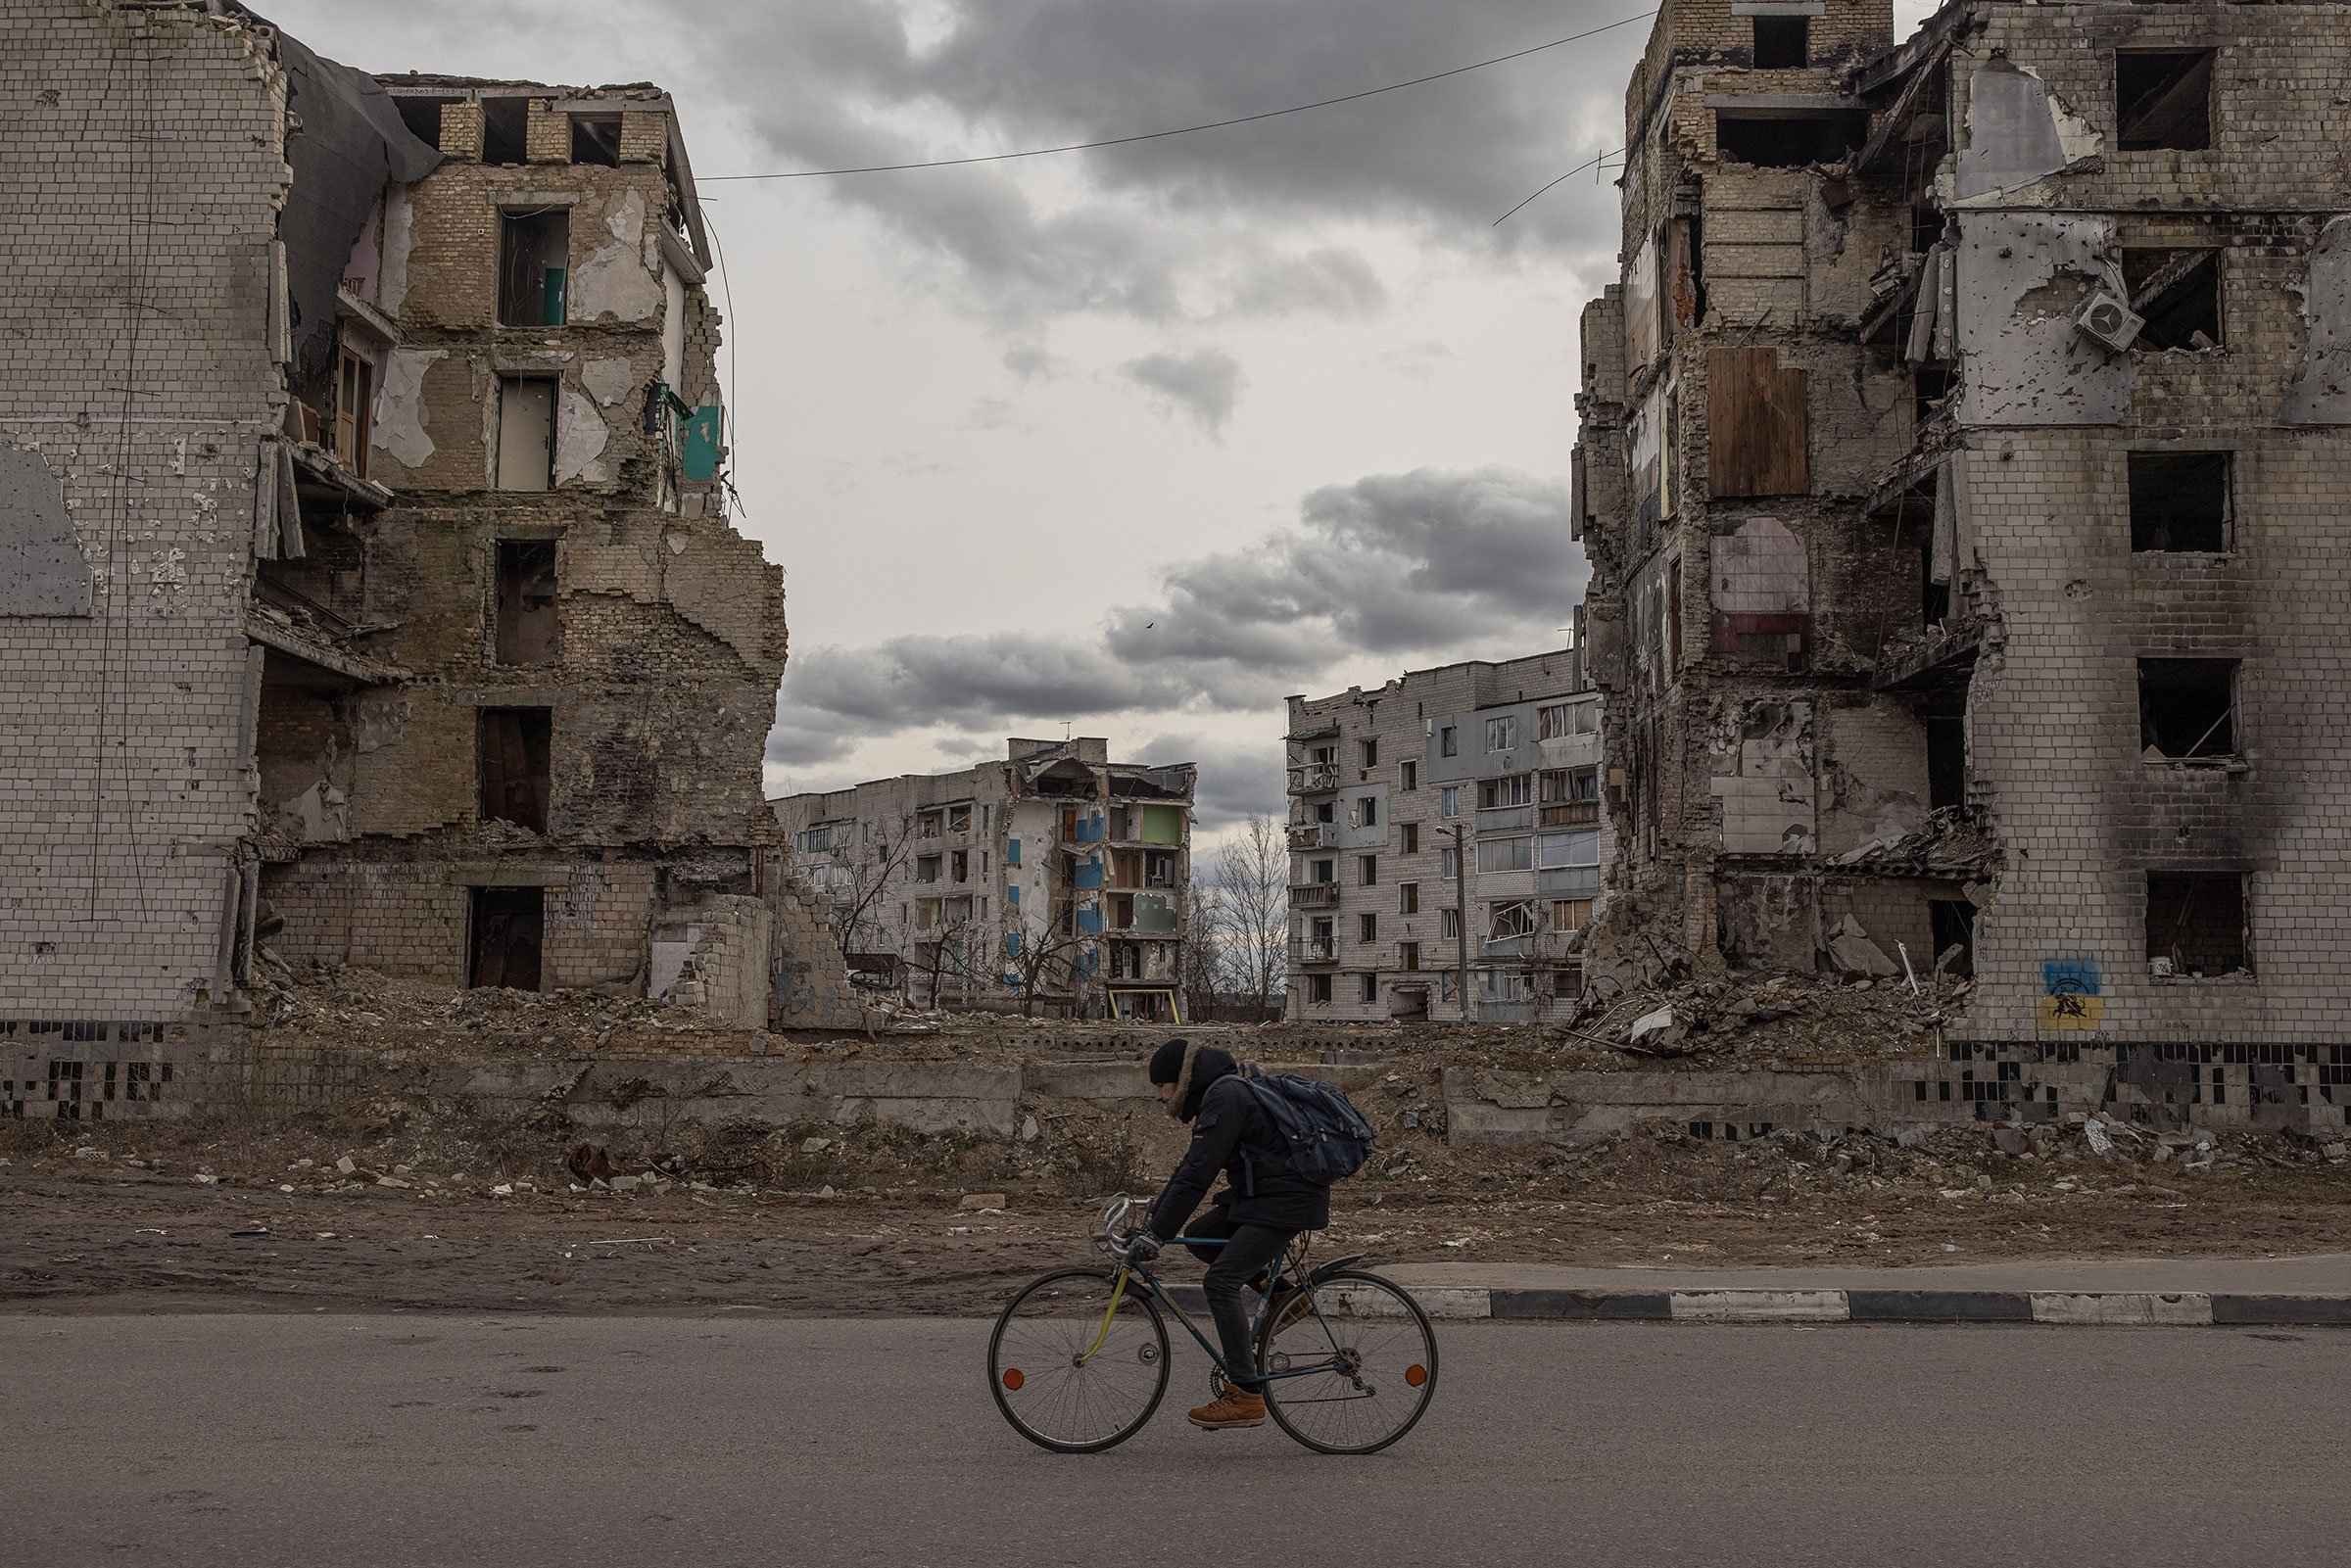 A man rides a bicycle past residential buildings that were destroyed during the Russian attack, on Feb. 20, 2023 in Borodyanka, Kyiv region, Ukraine. (Roman Pilipey—Getty Images)